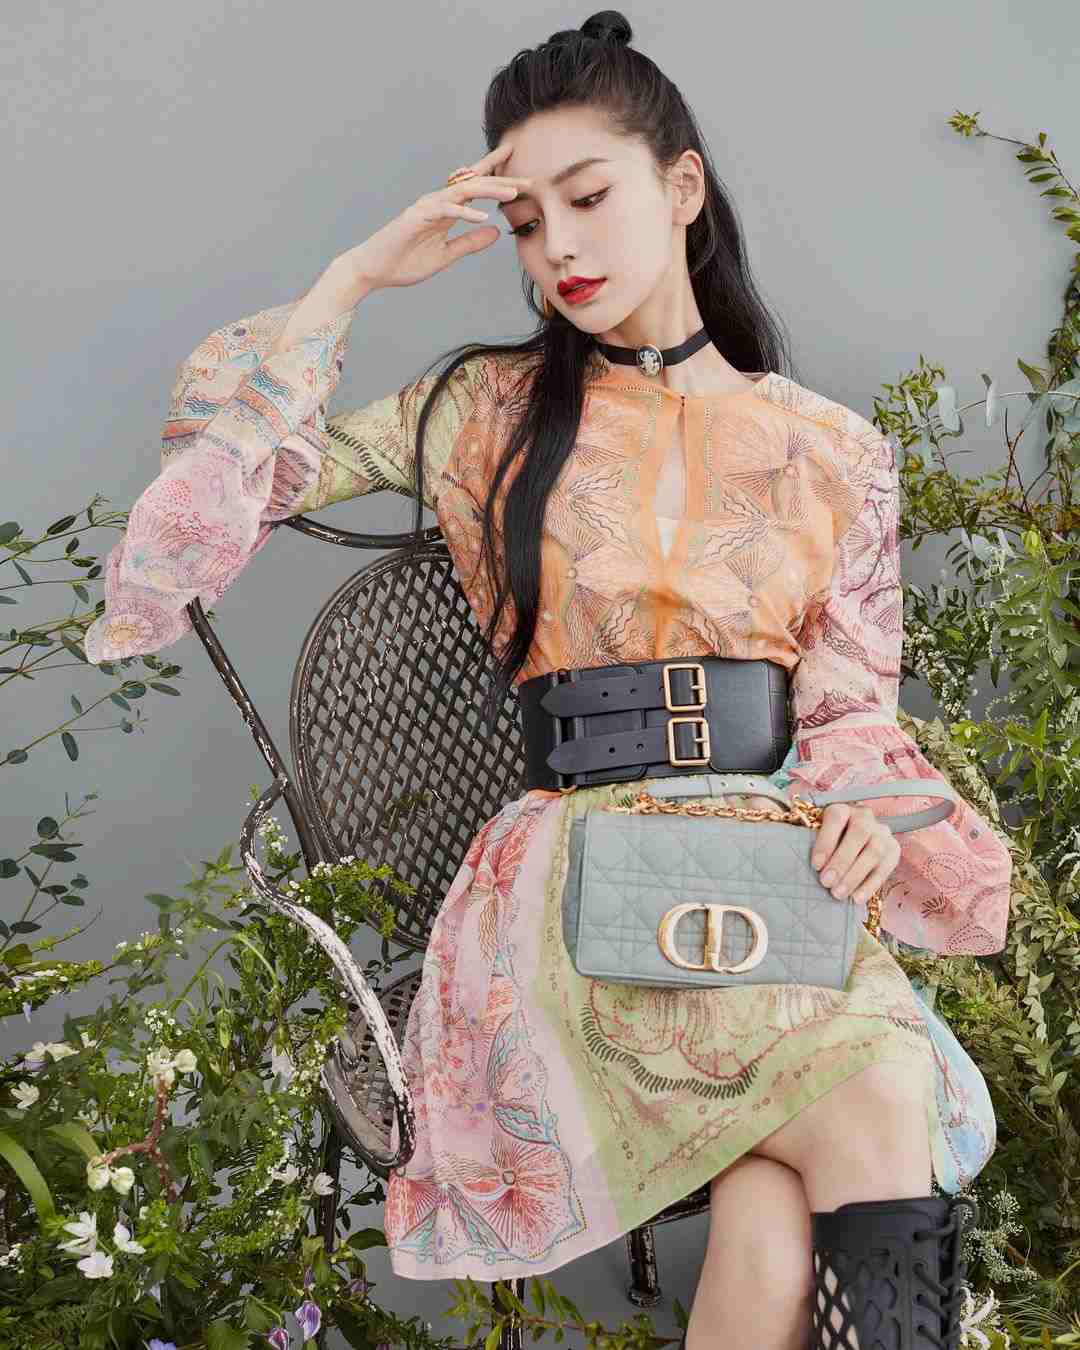 Angelababy - Biography, Profile, Facts, and Career